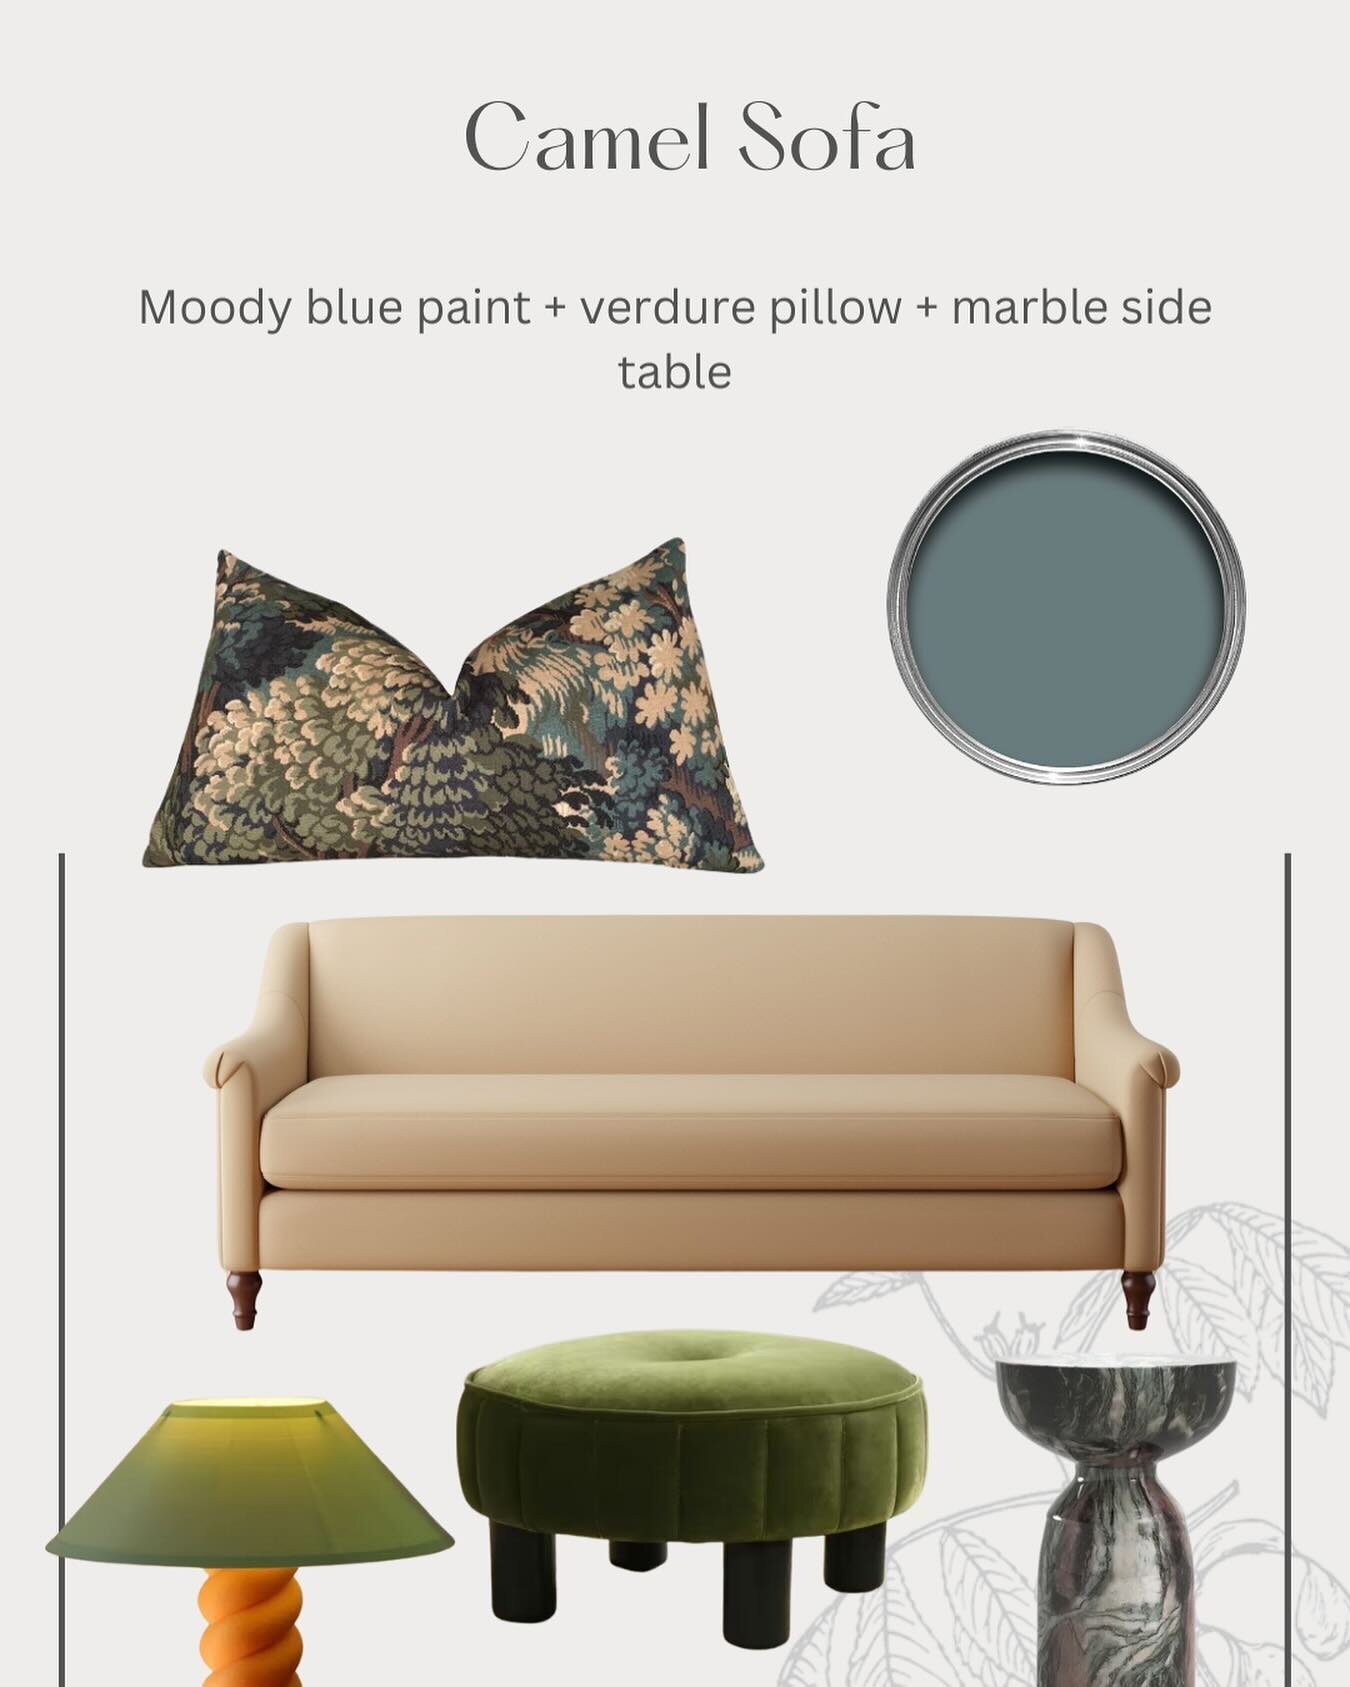 I&rsquo;m currently mildly obsessed with camel sofas and did a couple of designs for living rooms based around them! Weigh in on stories today (or like in the next hour 😬) @potterybarn 

#livingroomdesign #interiordesign #homedesign #verdure